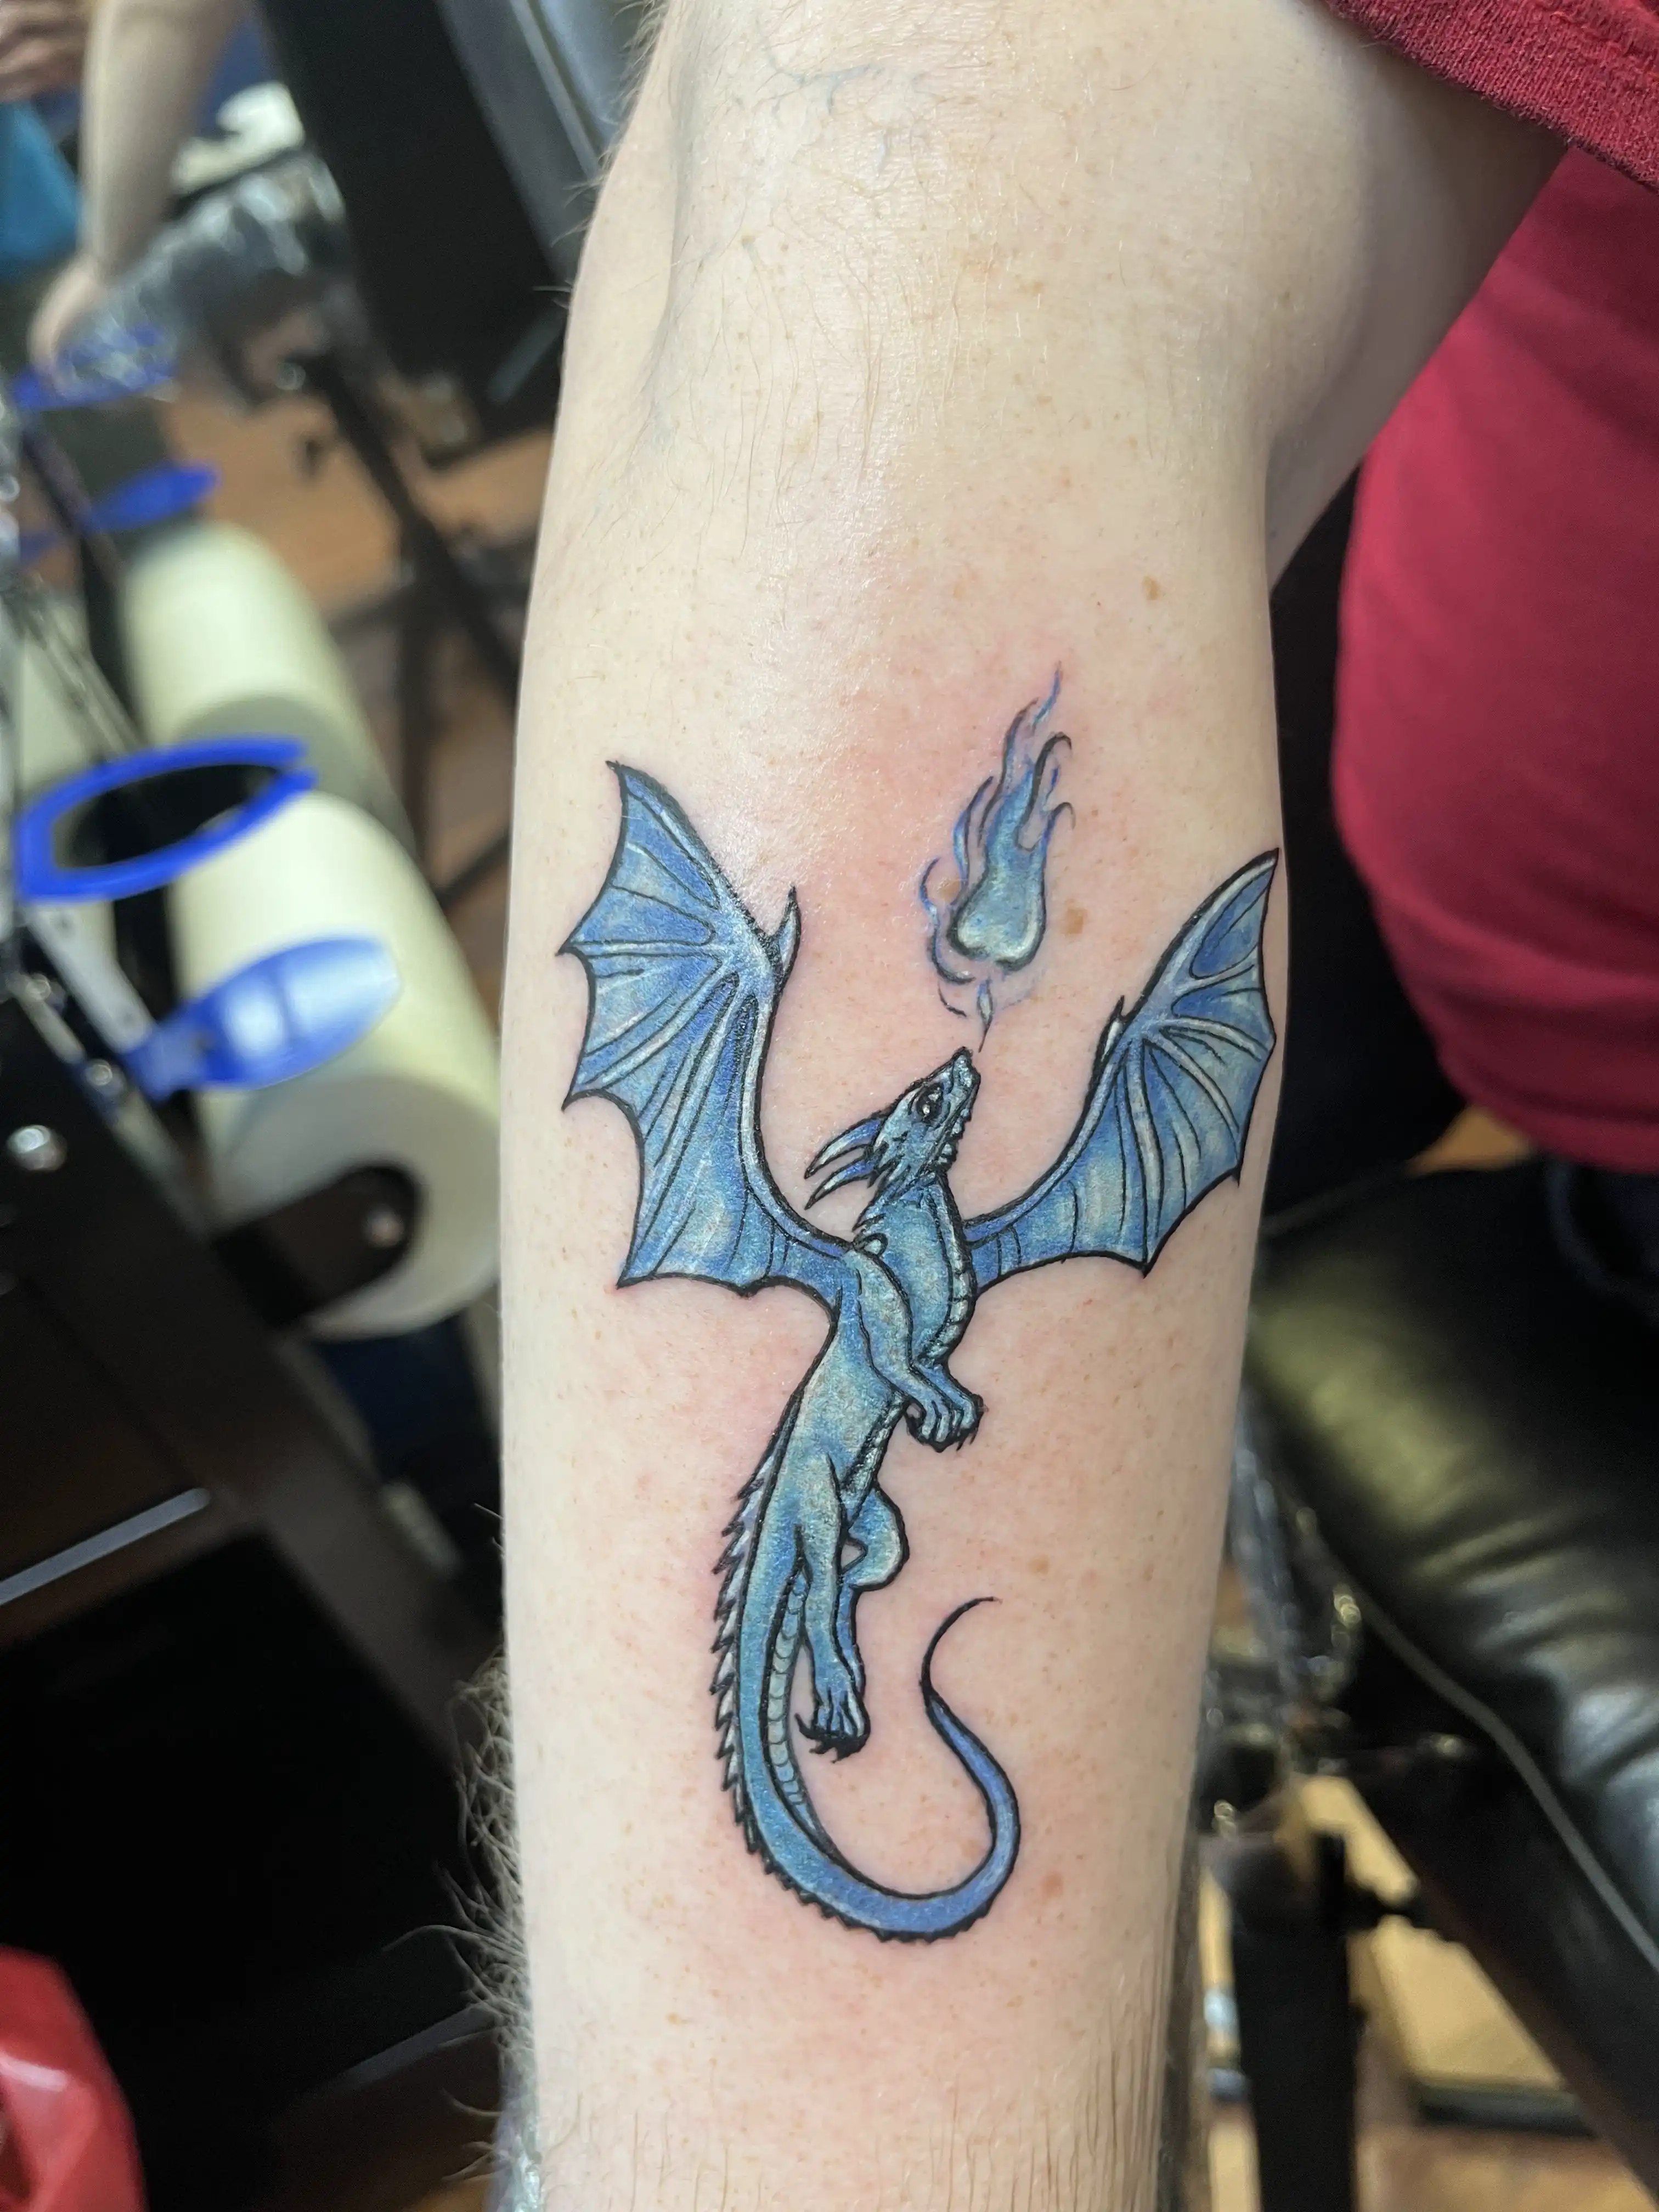 Dragon tattoo Fine Line Tattoos by Rorschach Tattoo Shop and Piercing Studio and Milk District Tattoo Shop Near Me